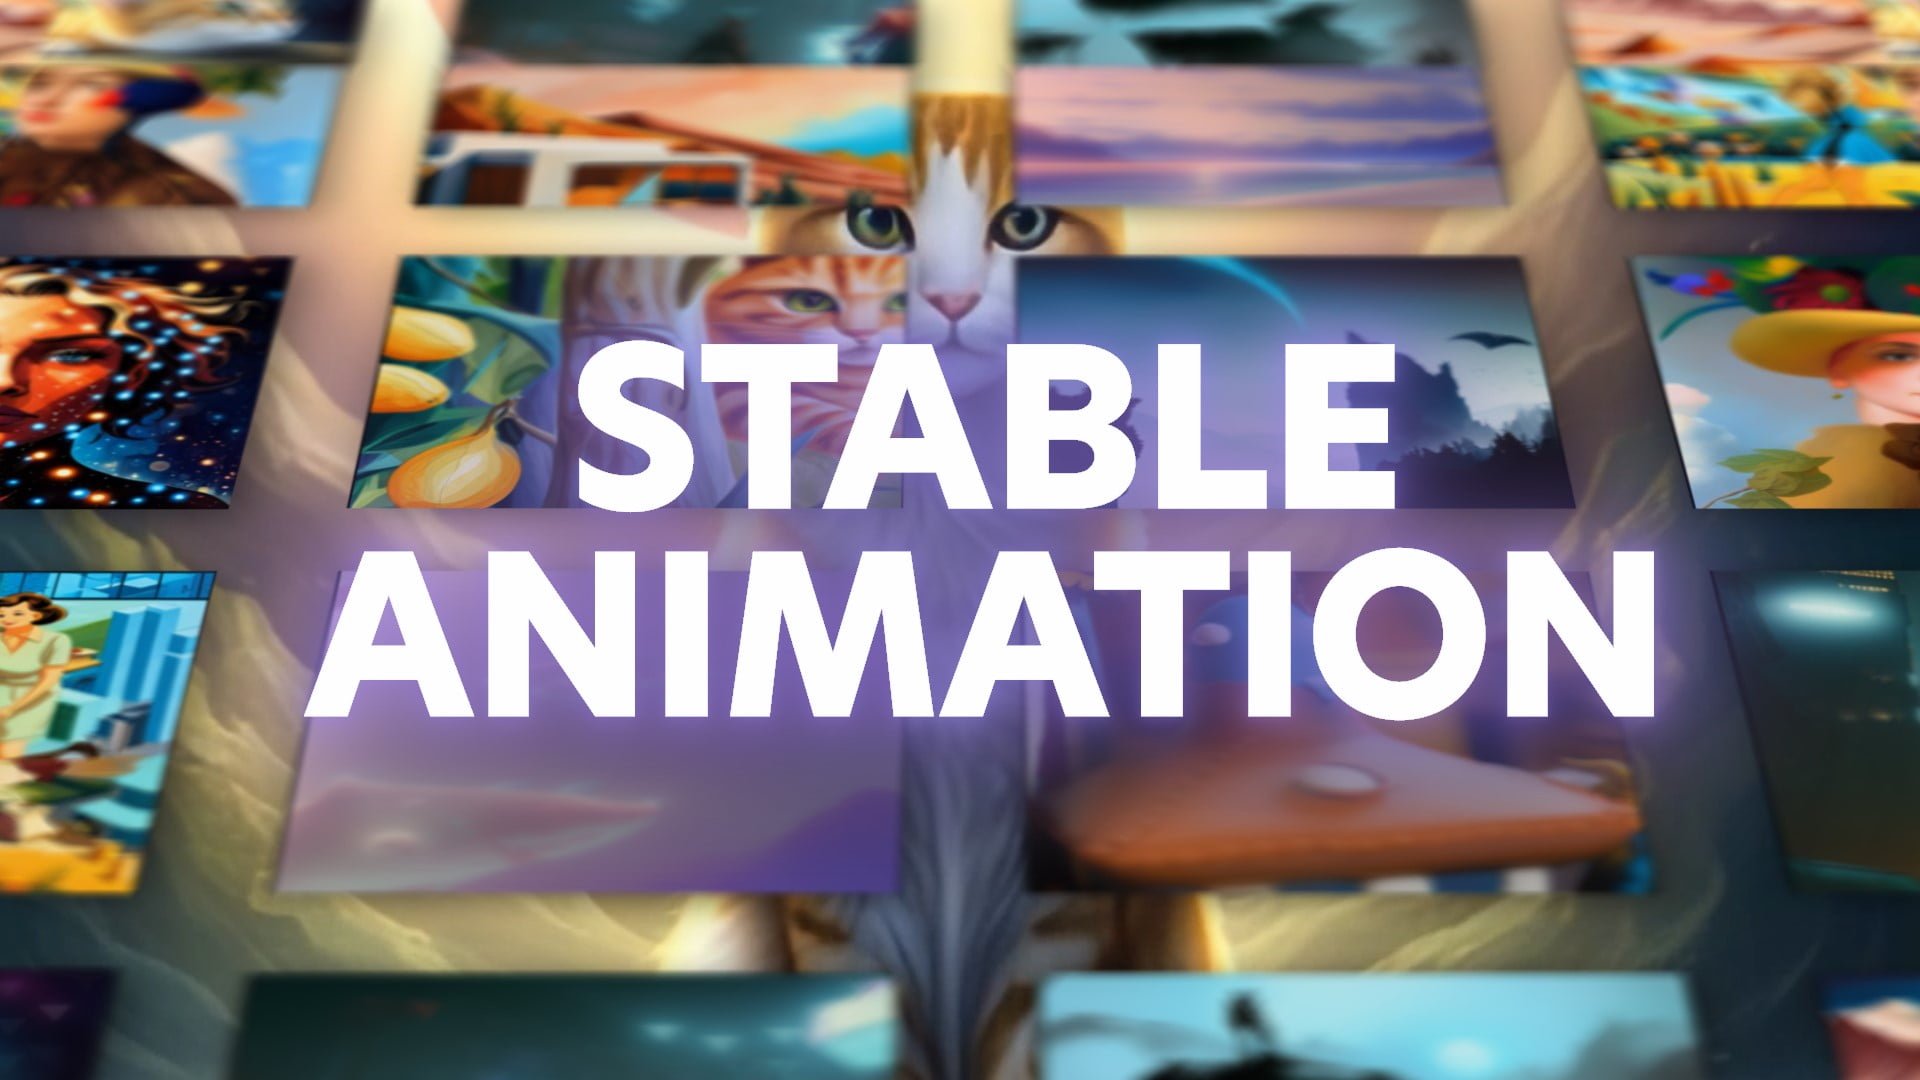 Stable Animation: Stability AI makes images move